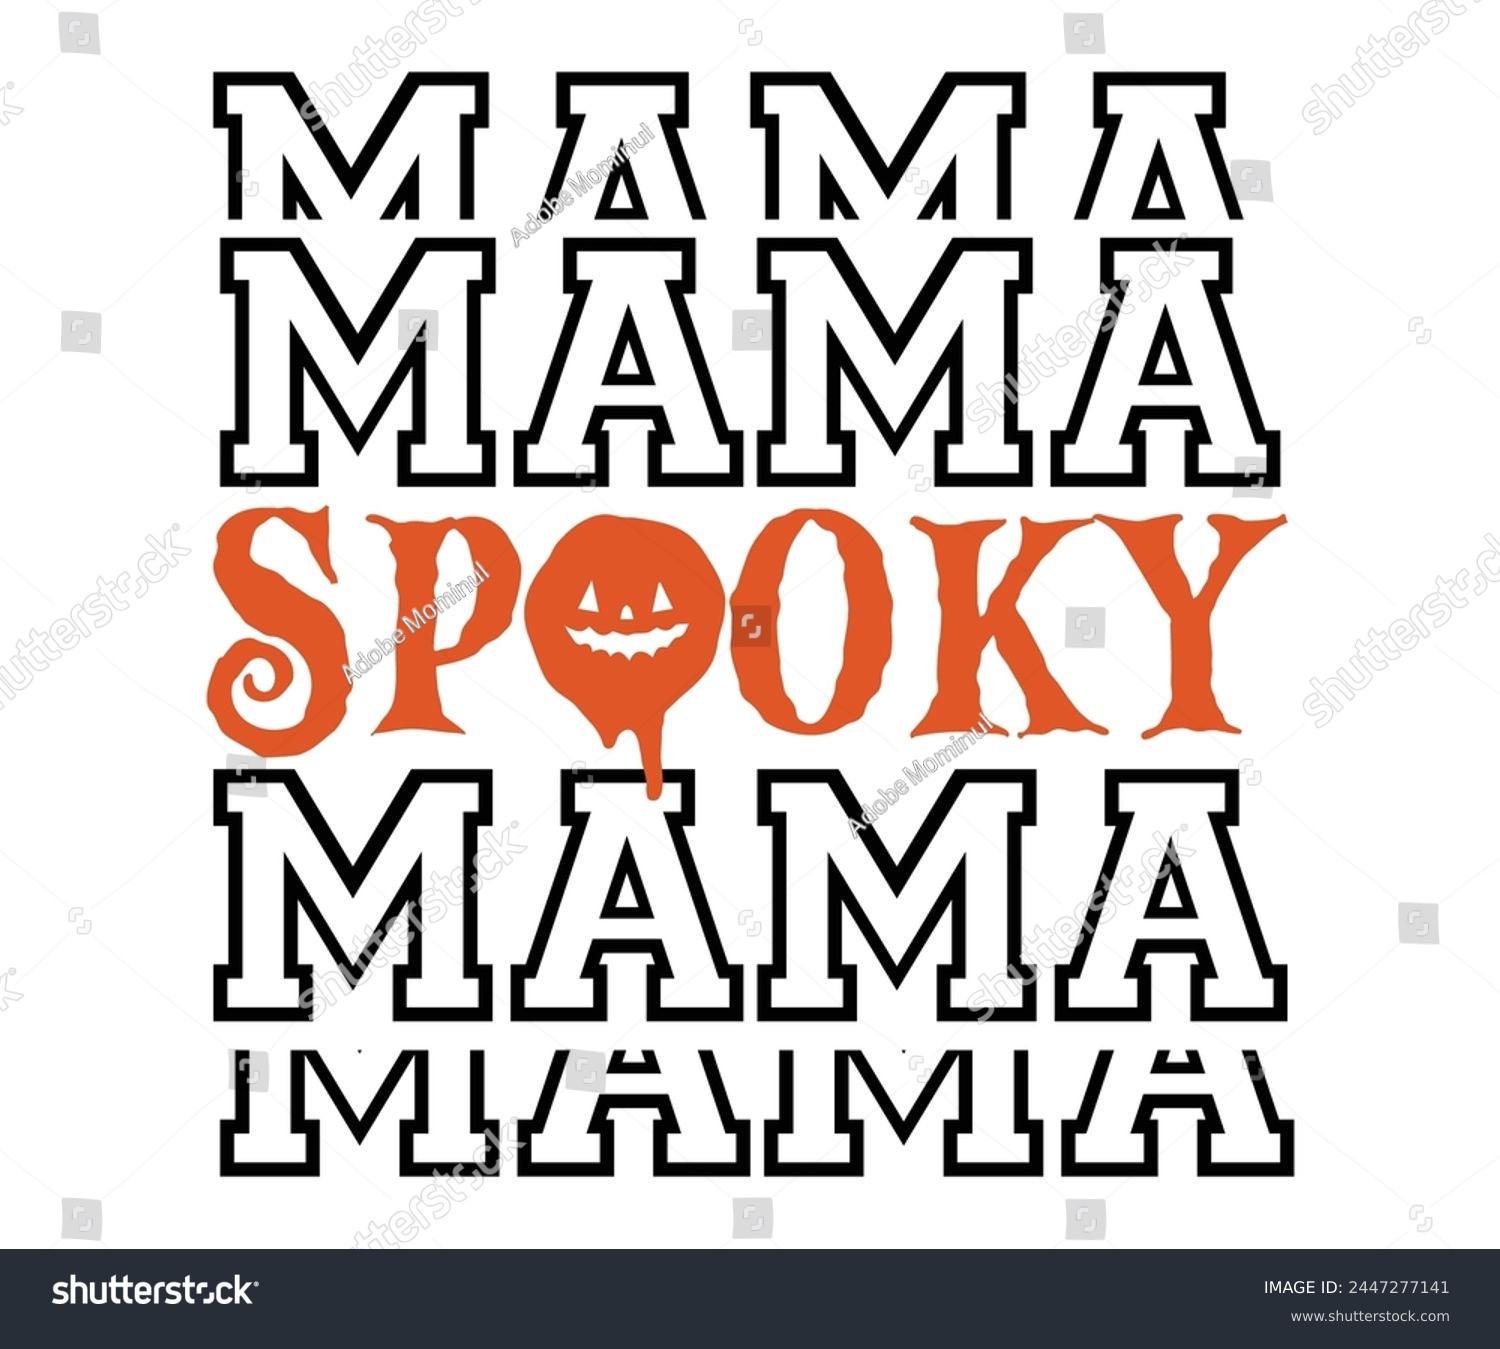 SVG of Spooky Mama,Halloween Svg,Typography,Halloween Quotes,Witches Svg,Halloween Party,Halloween Costume,Halloween Gift,Funny Halloween,Spooky Svg,Funny T shirt,Ghost Svg,Cut file svg